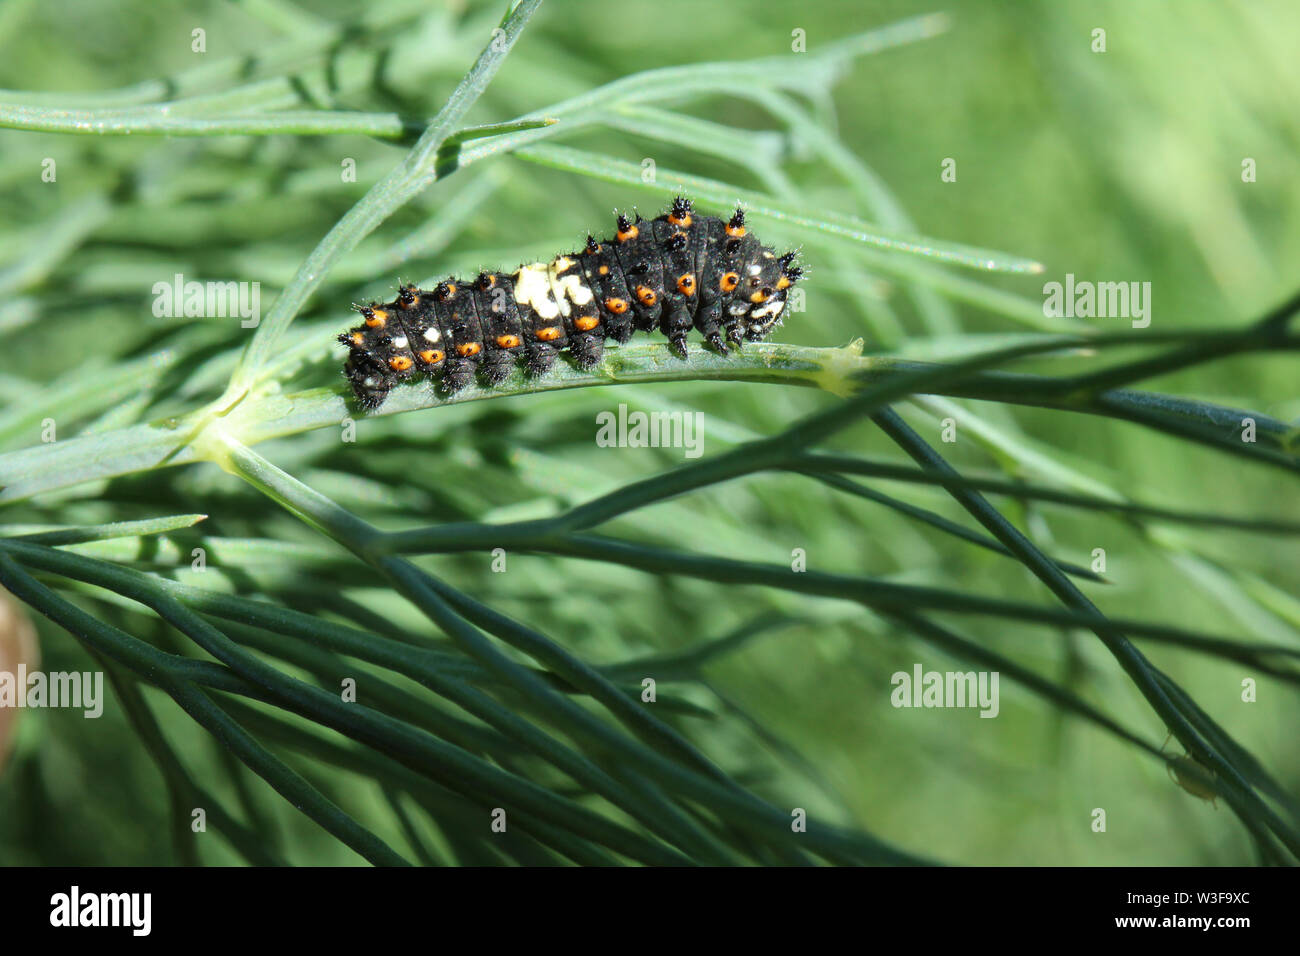 First Instar Black Swallowtail Caterpillar eating some dill in the garden. Stock Photo